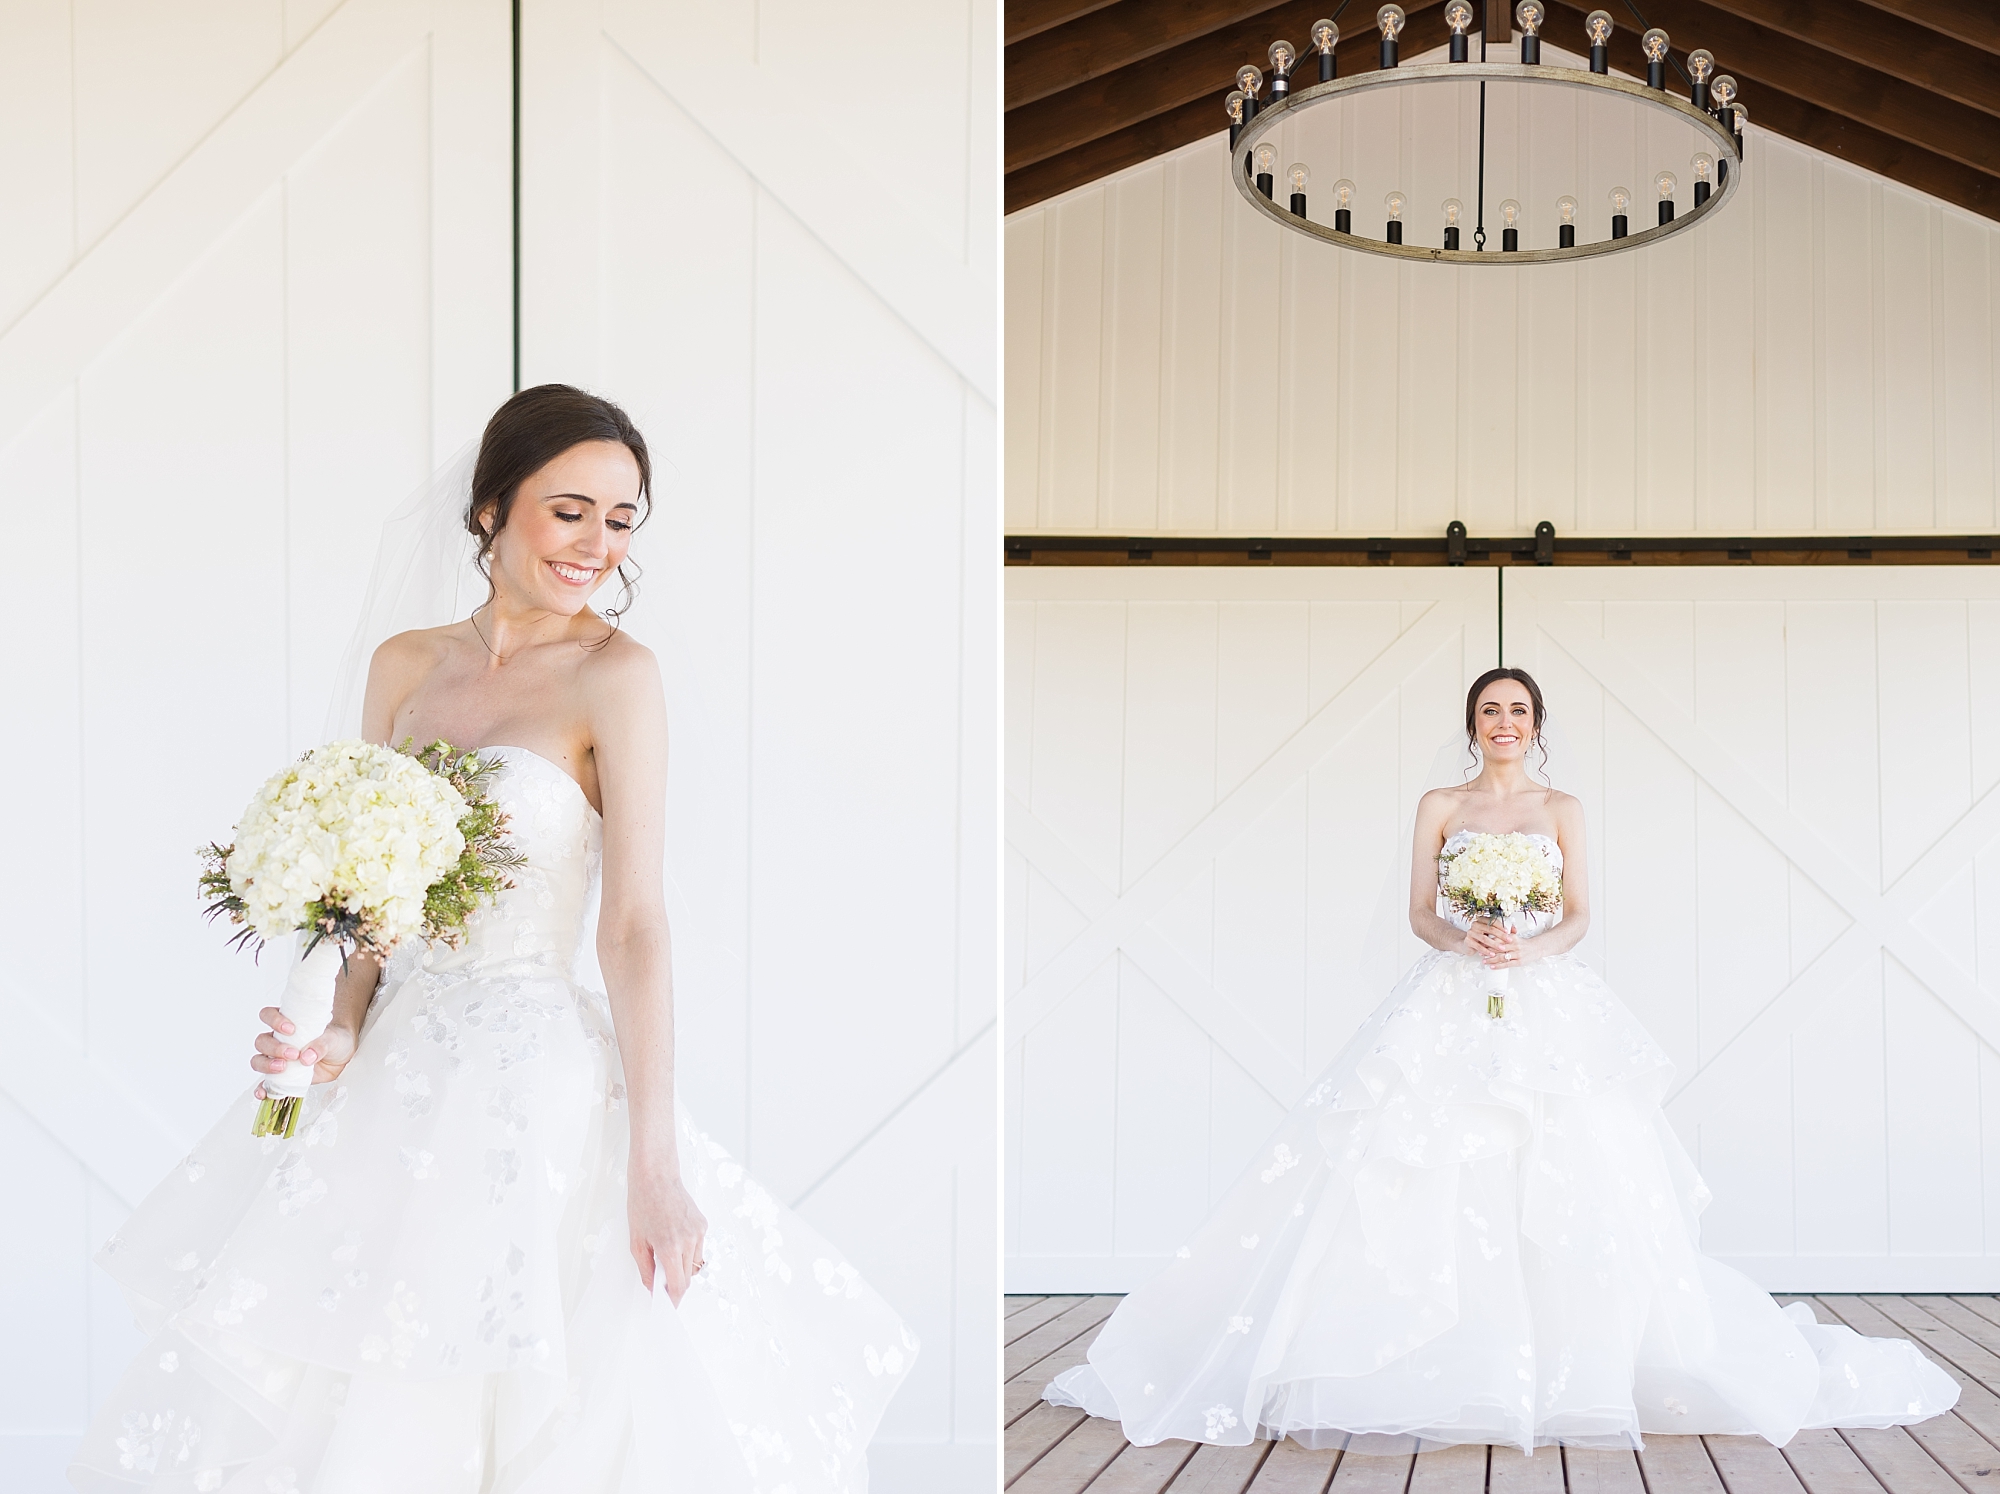 Bridal portraits in an elegant ballgown at Southern Grace Farms in Angier | Raleigh Wedding Photographer